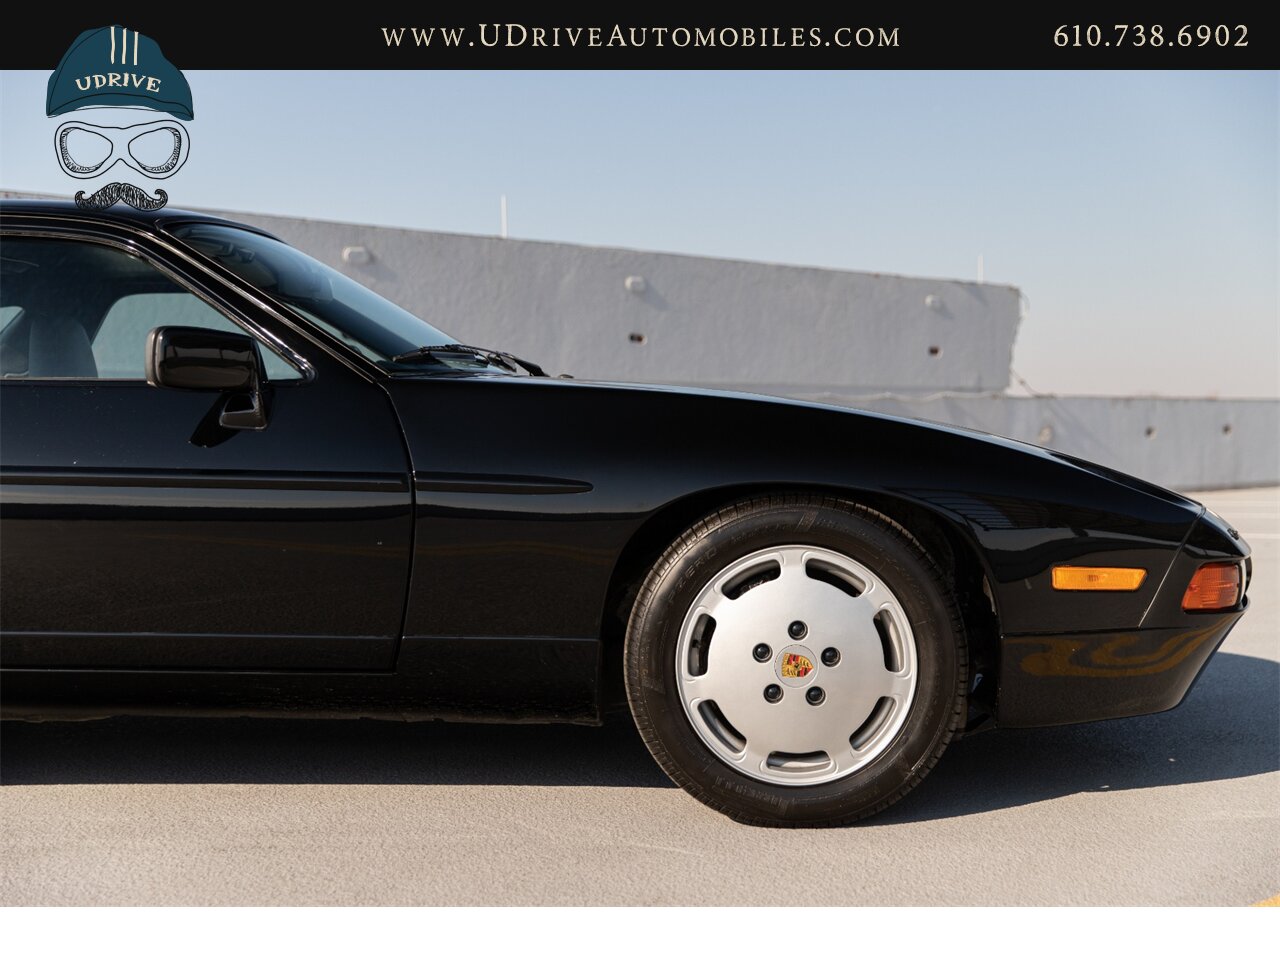 1990 Porsche 928 S4 $58k in Service History Since 2014   - Photo 14 - West Chester, PA 19382